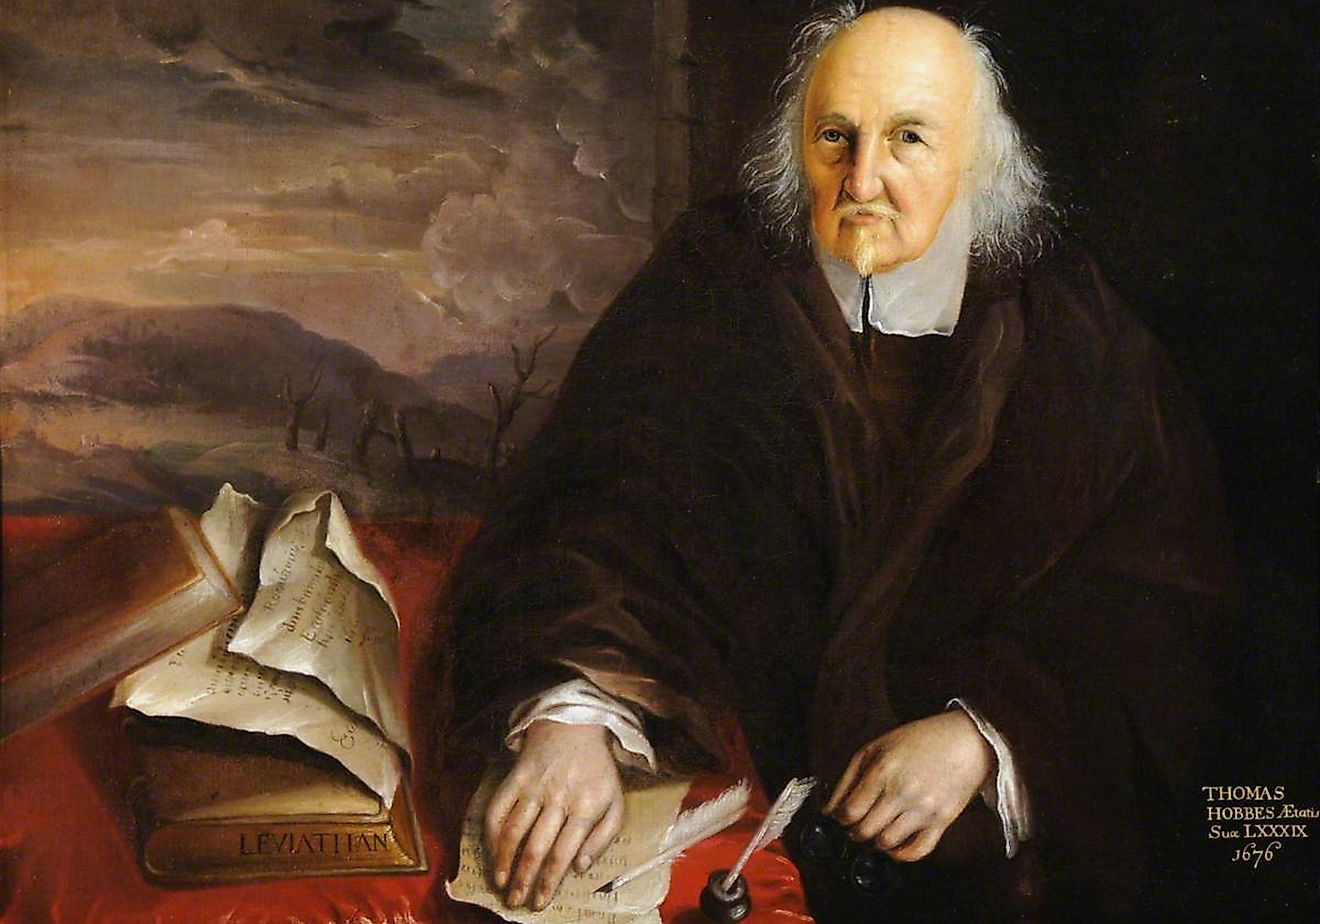 A portrait of Thomas Hobbes at age 89.